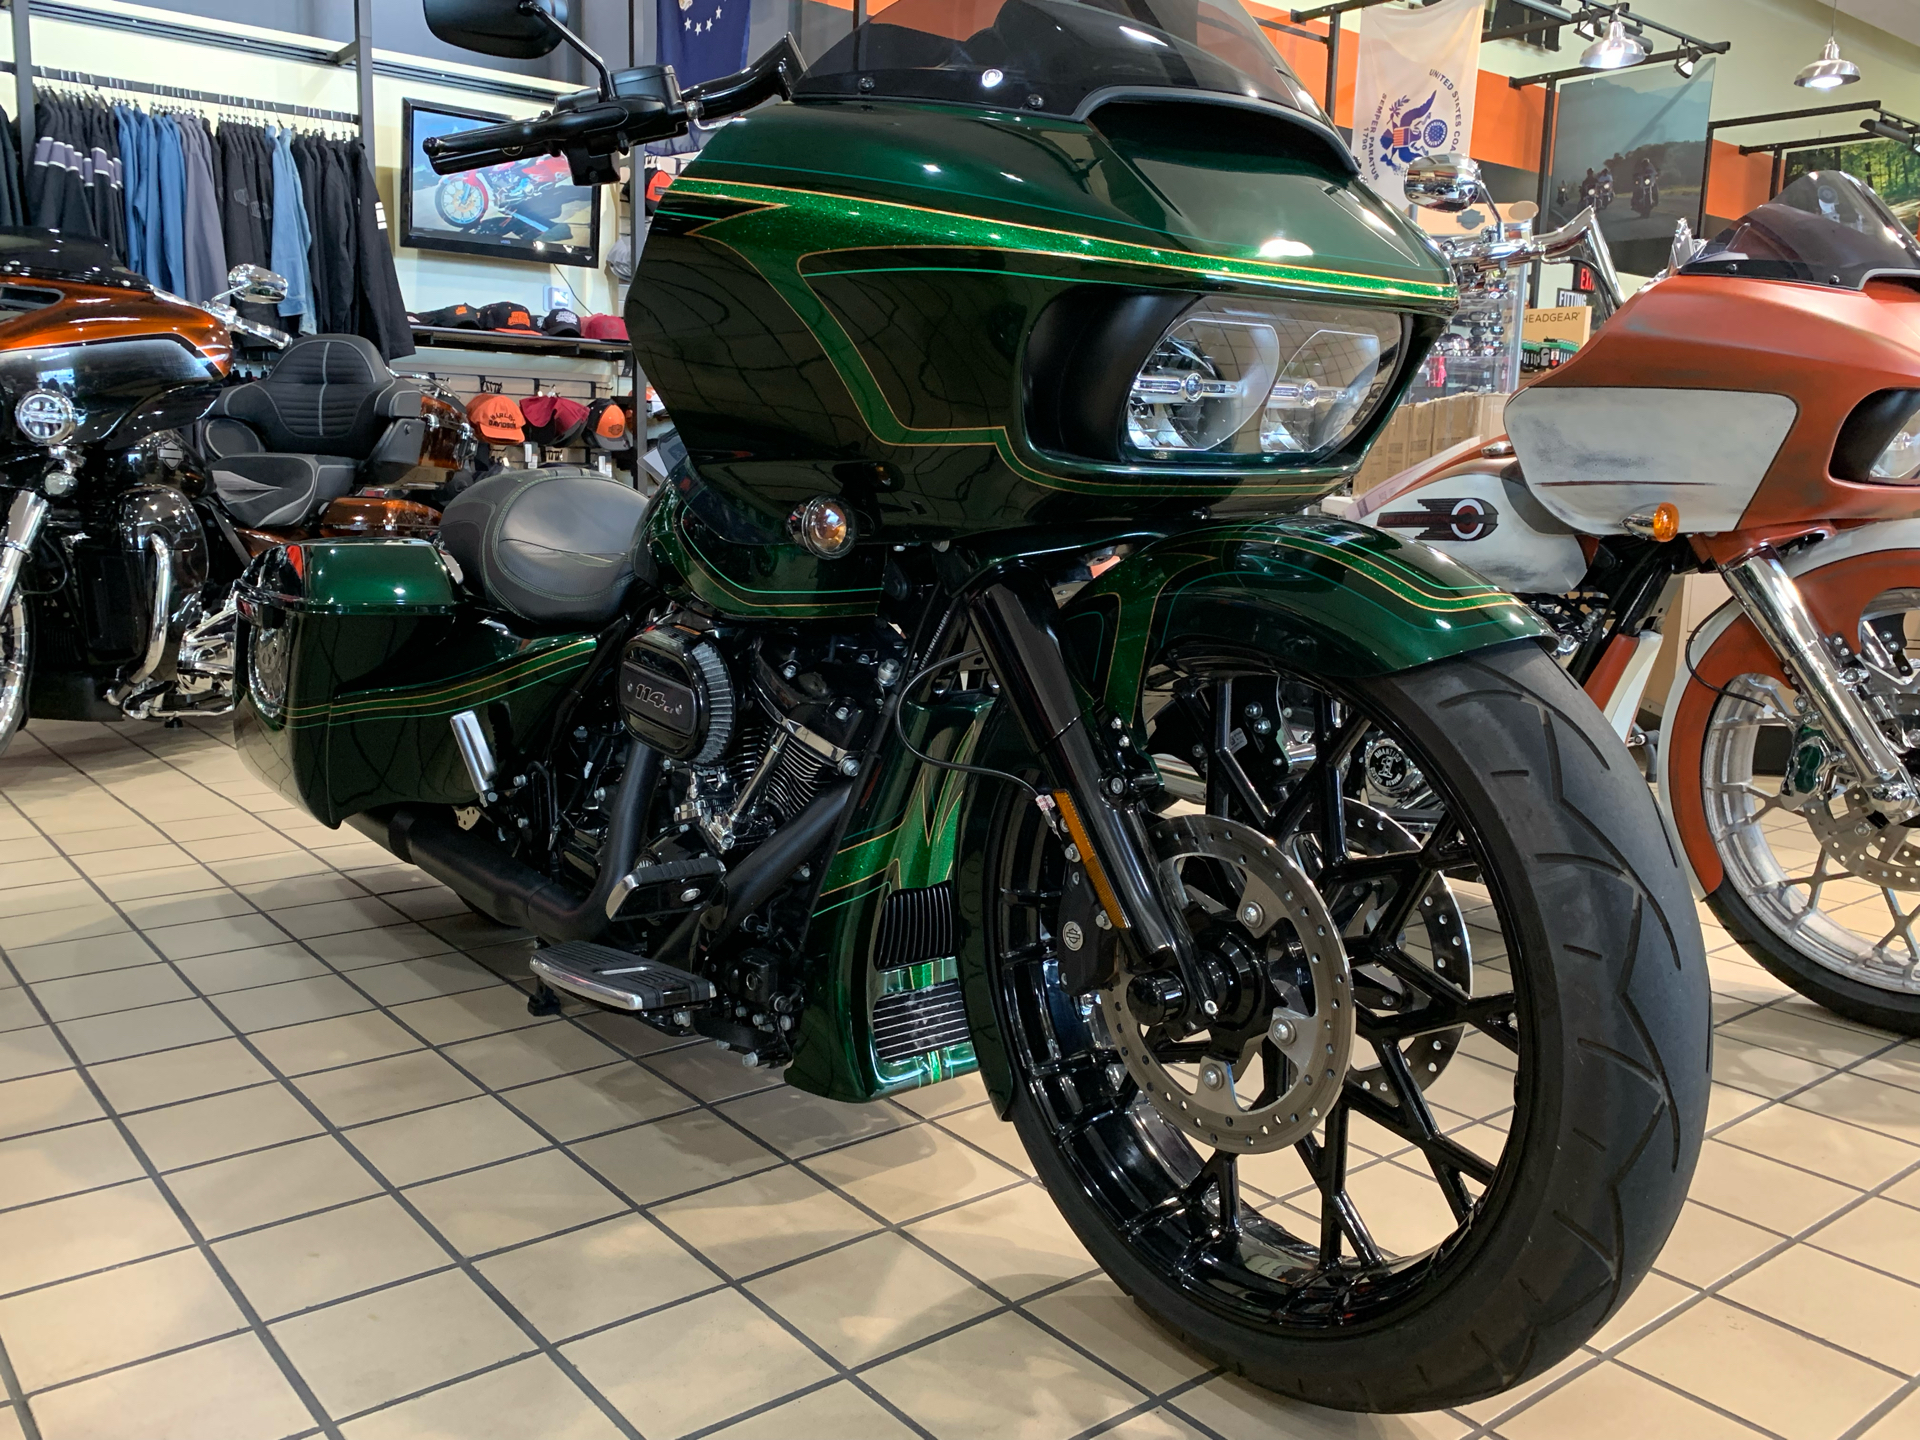 2021 Harley-Davidson Road Glide Special in Dumfries, Virginia - Photo 2